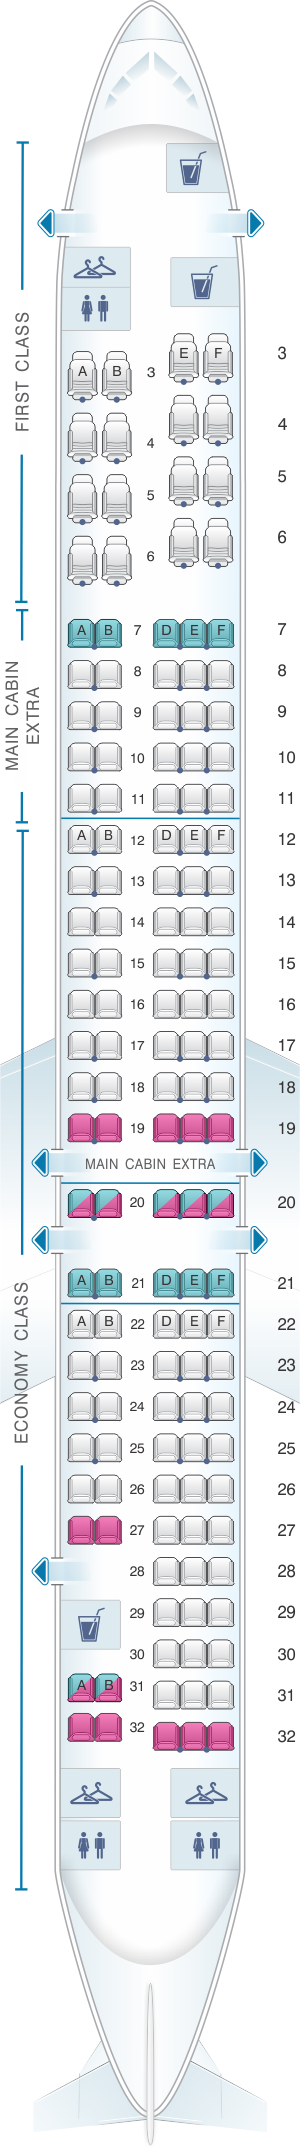 Seat map for American Airlines McDonnell Douglas MD 80